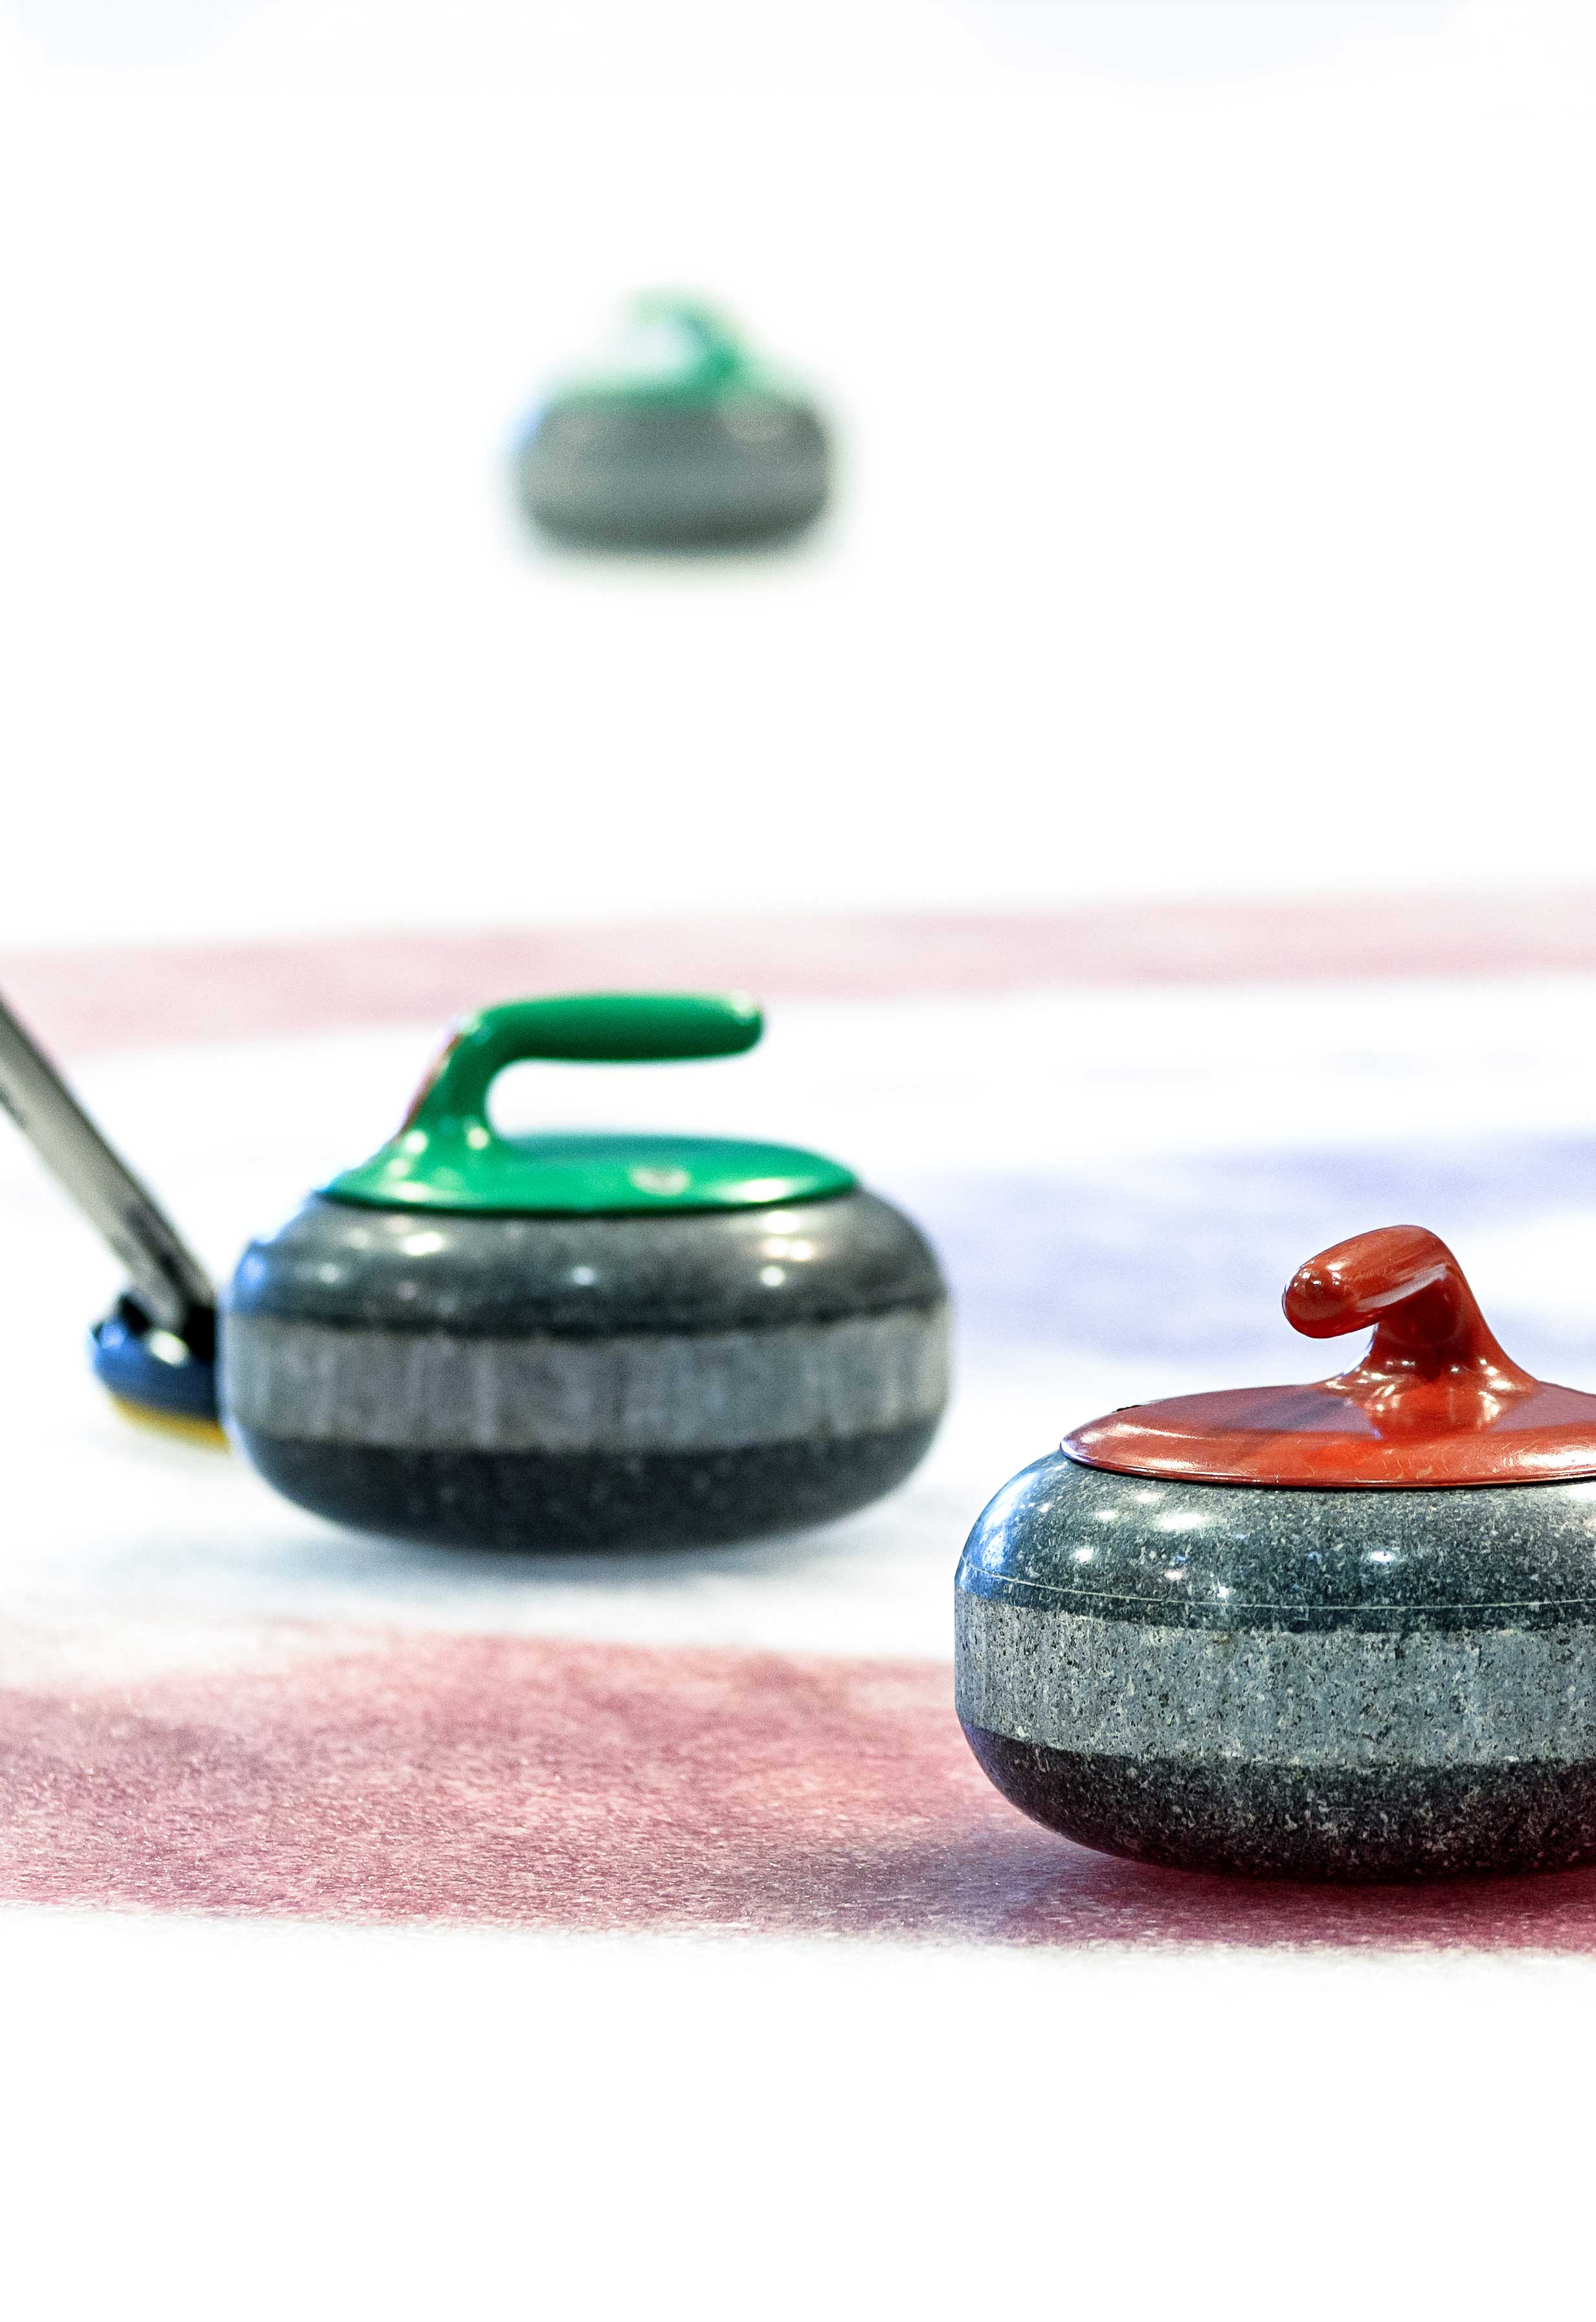 Try Curling